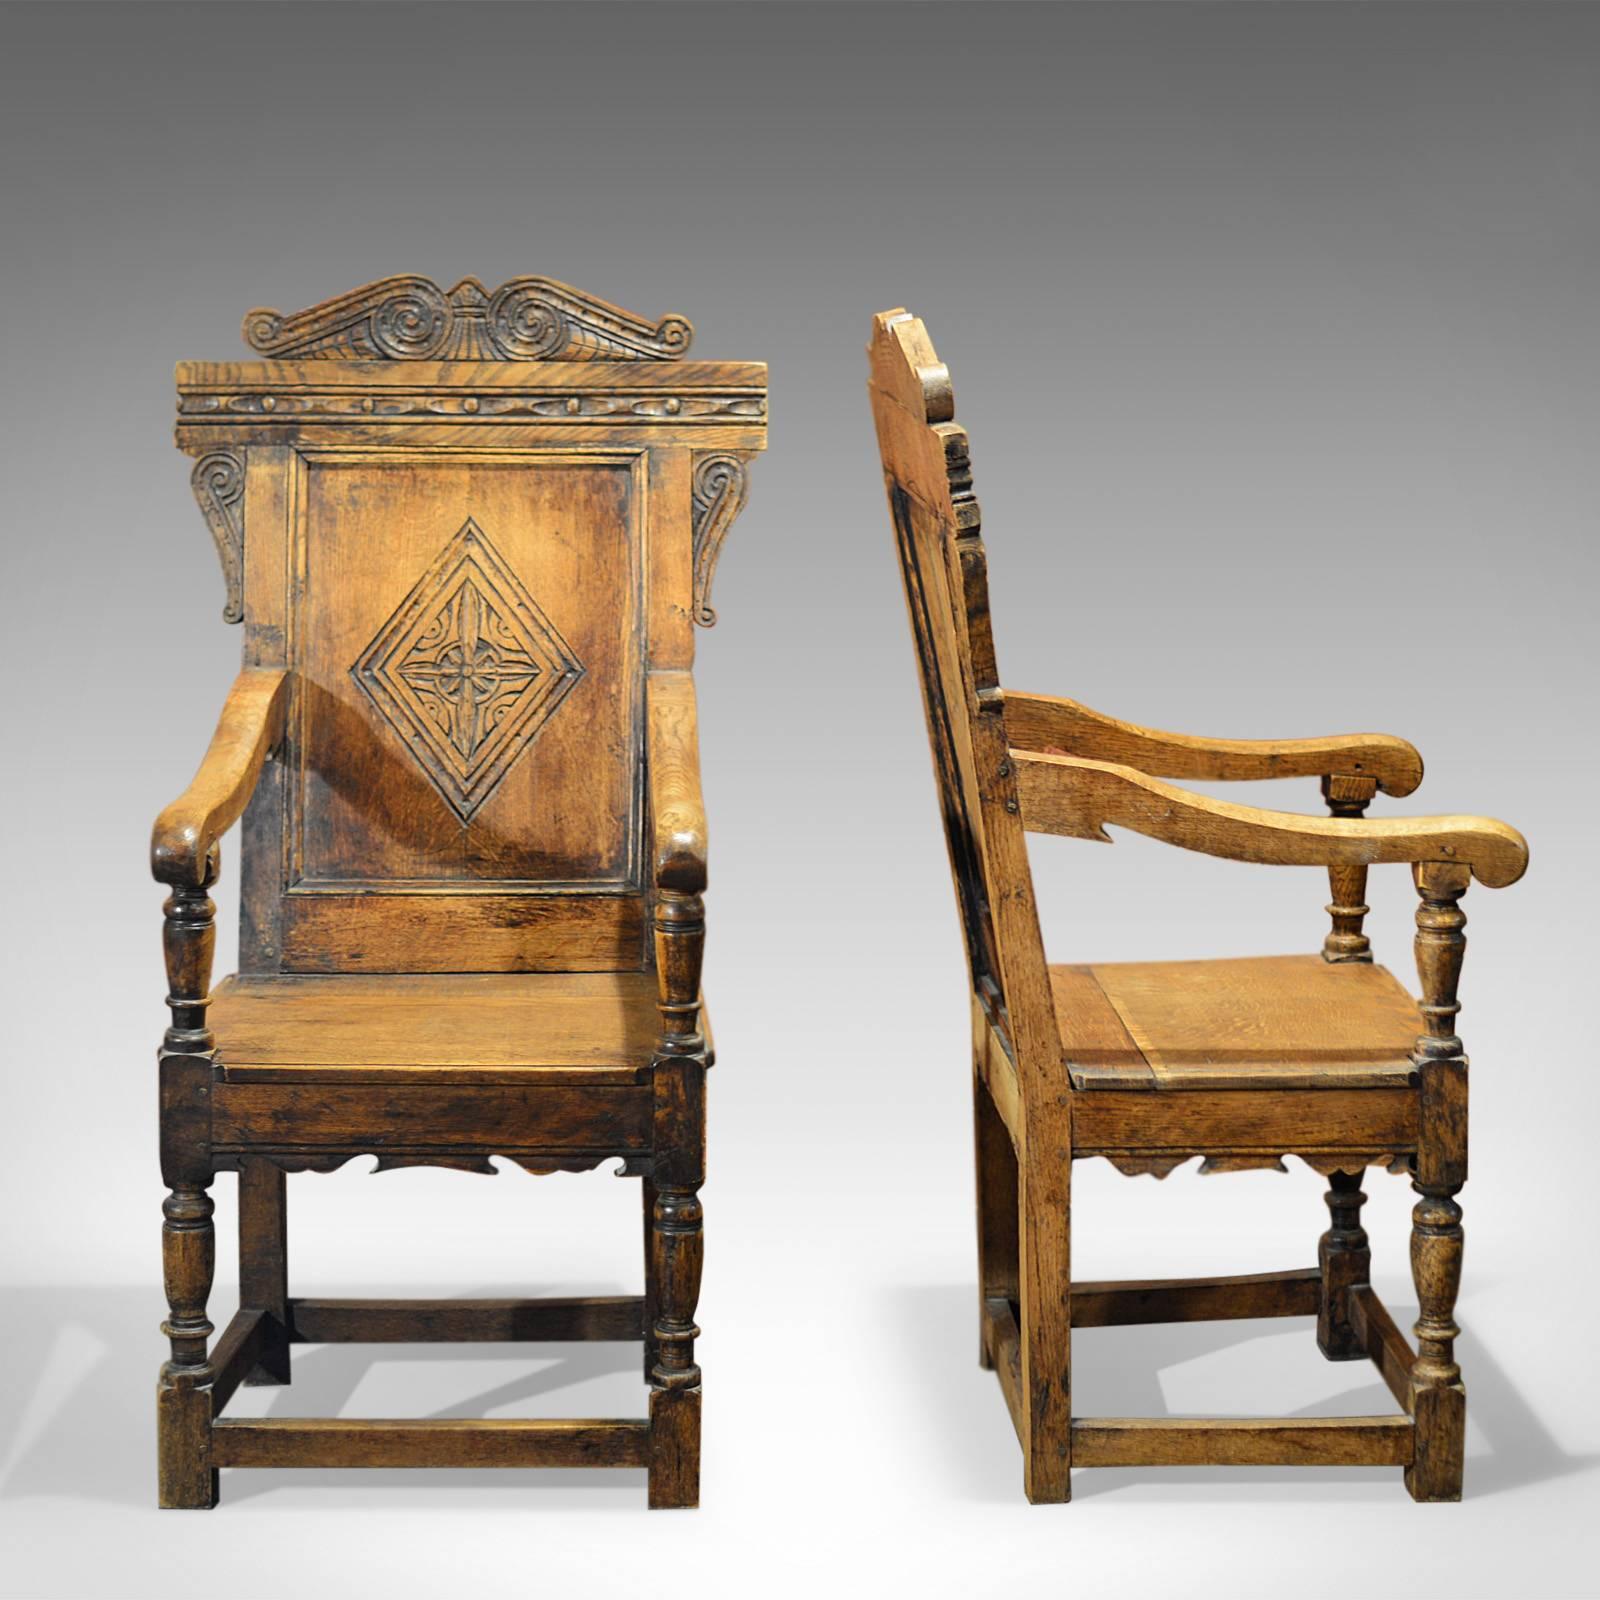 Gothic Revival Antique Pair of Hall Chairs, 19th Century, Baronial